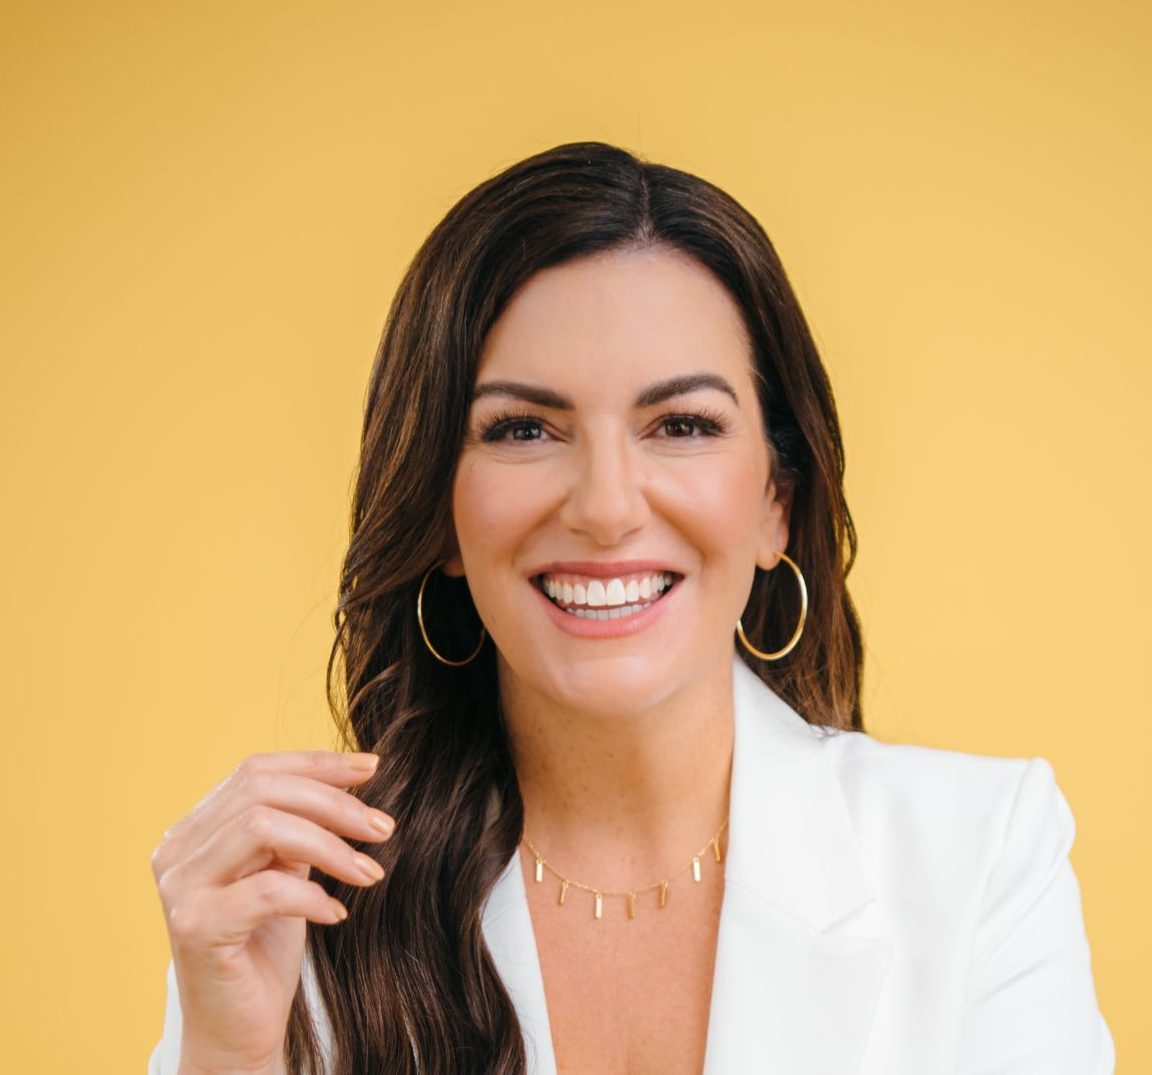 Amy Porterfield on How to Quit Your Job, Make Money & Change the